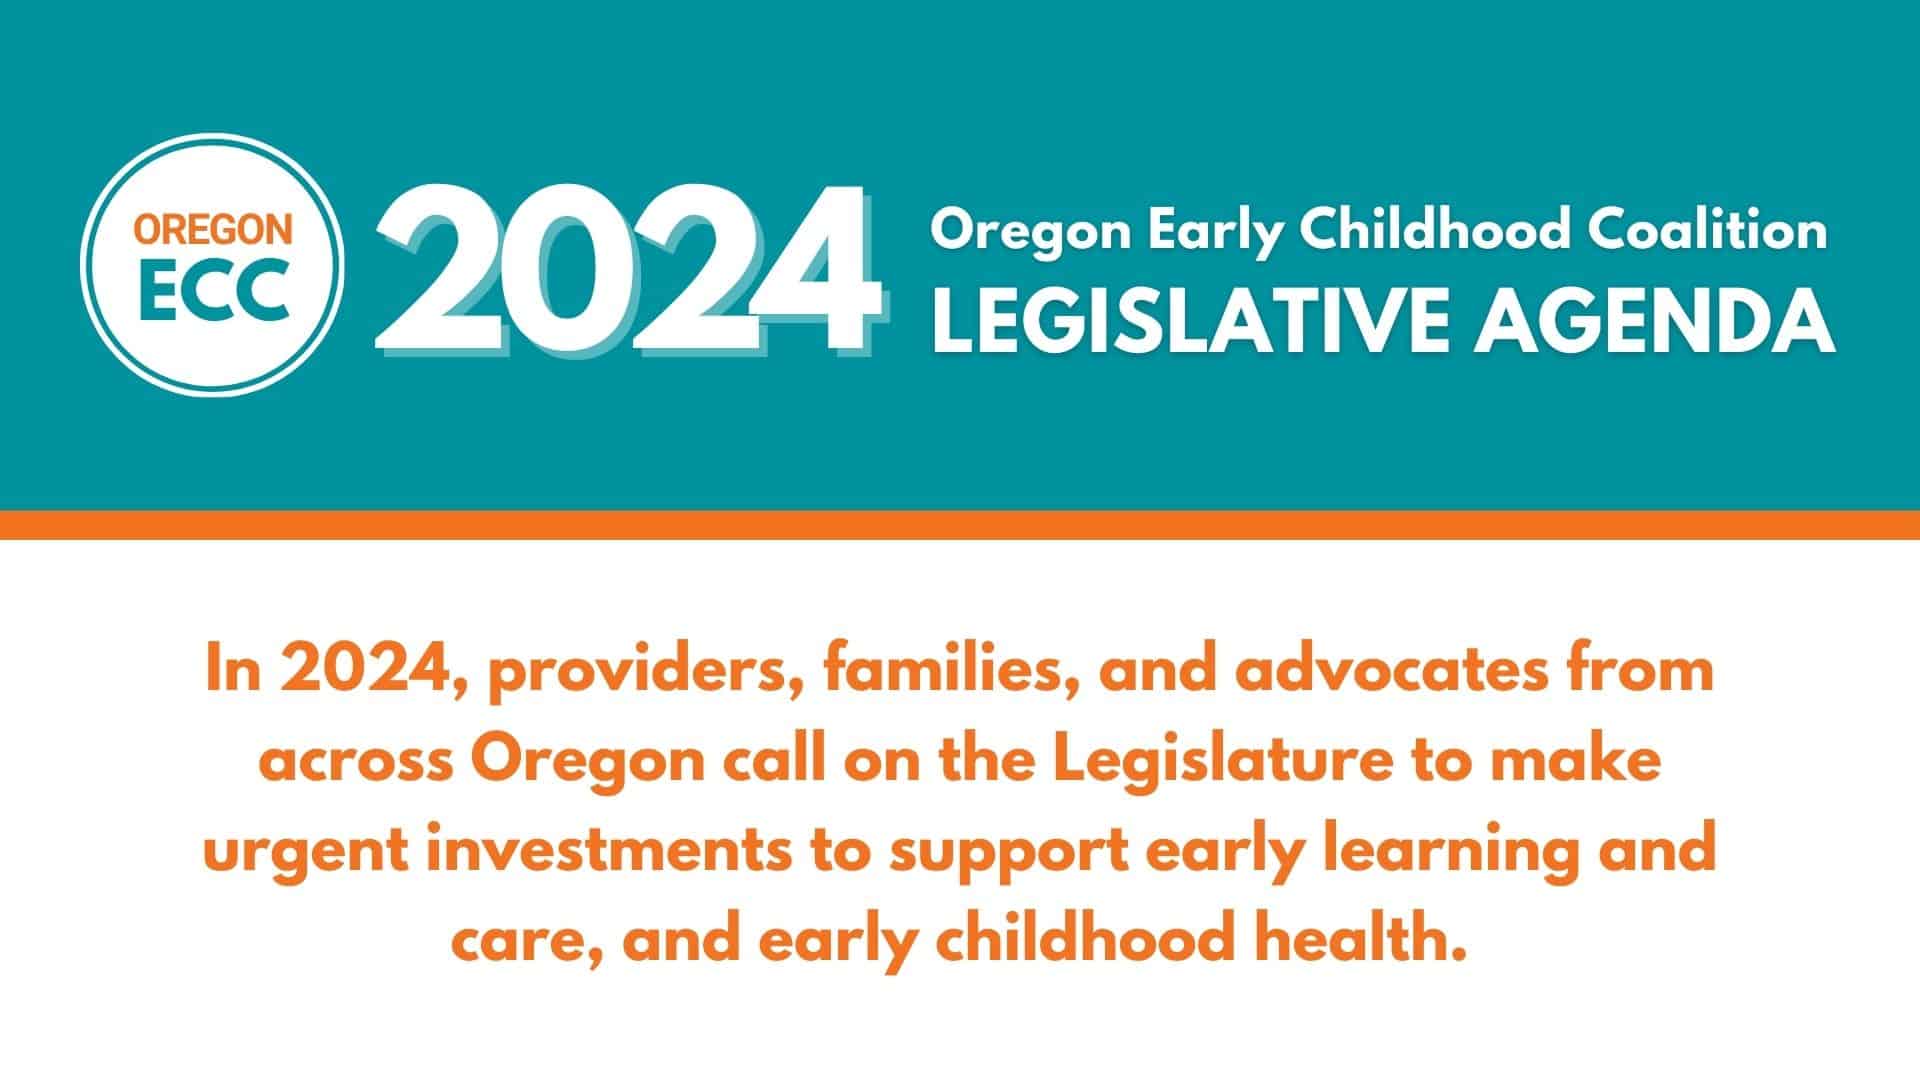 This is a turquoise and white graphic announcing the 2024 ECC Legislative Agenda in bold type.